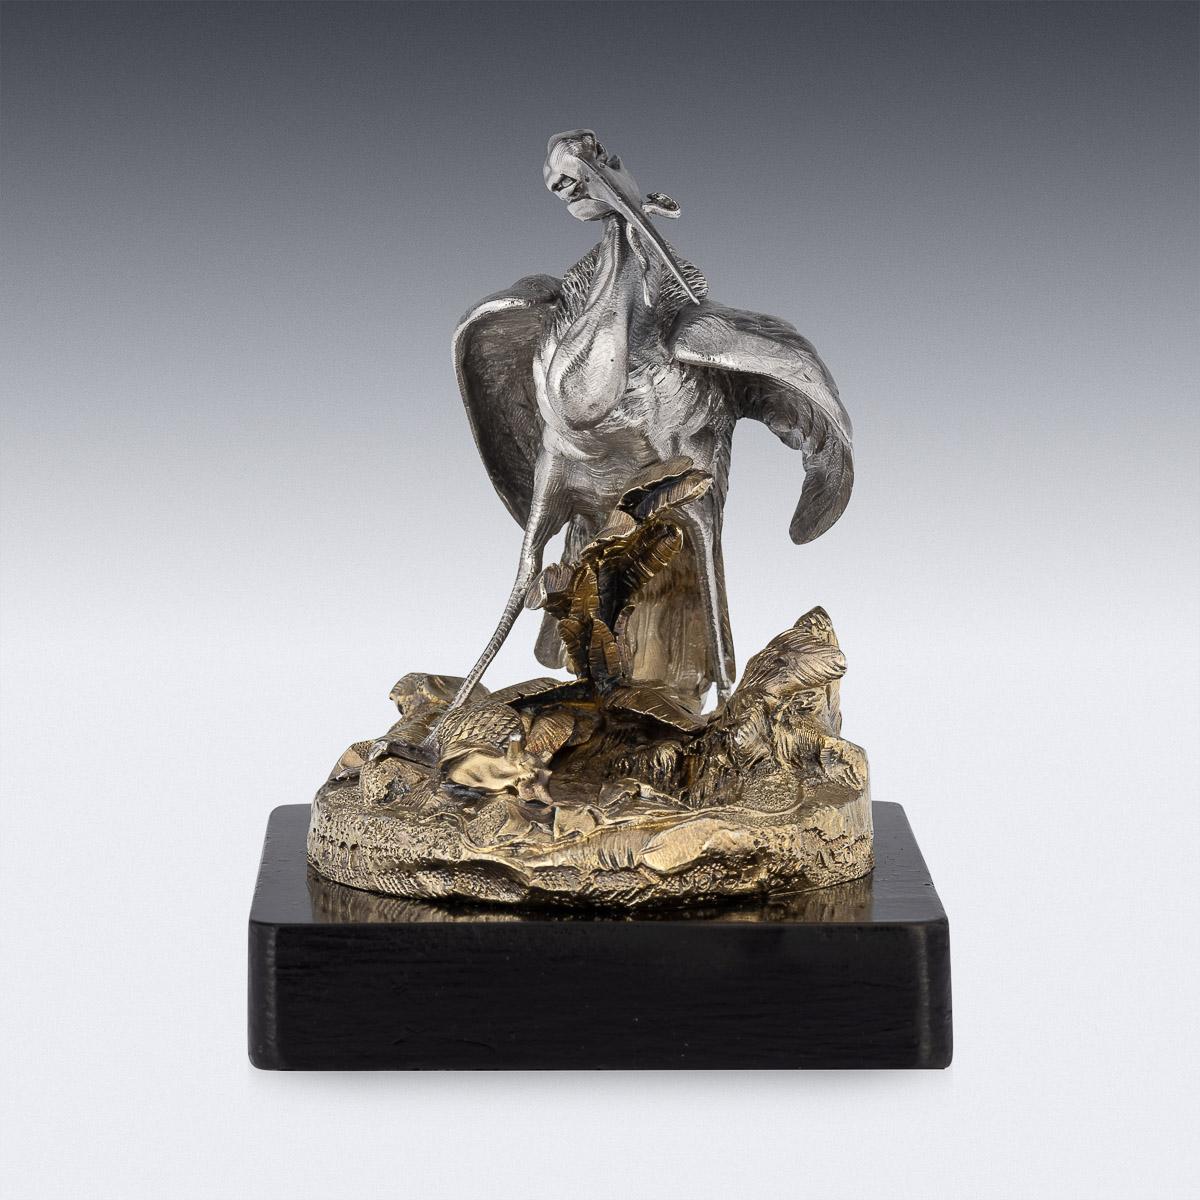 19th Century Victorian silver-gilt desk paperweight, on black ebonised base and mounted with a realistically modelled statue of a heron catching a snake amongst vegetation, extremely detailed and of the finest quality.
Hallmarked English Silver